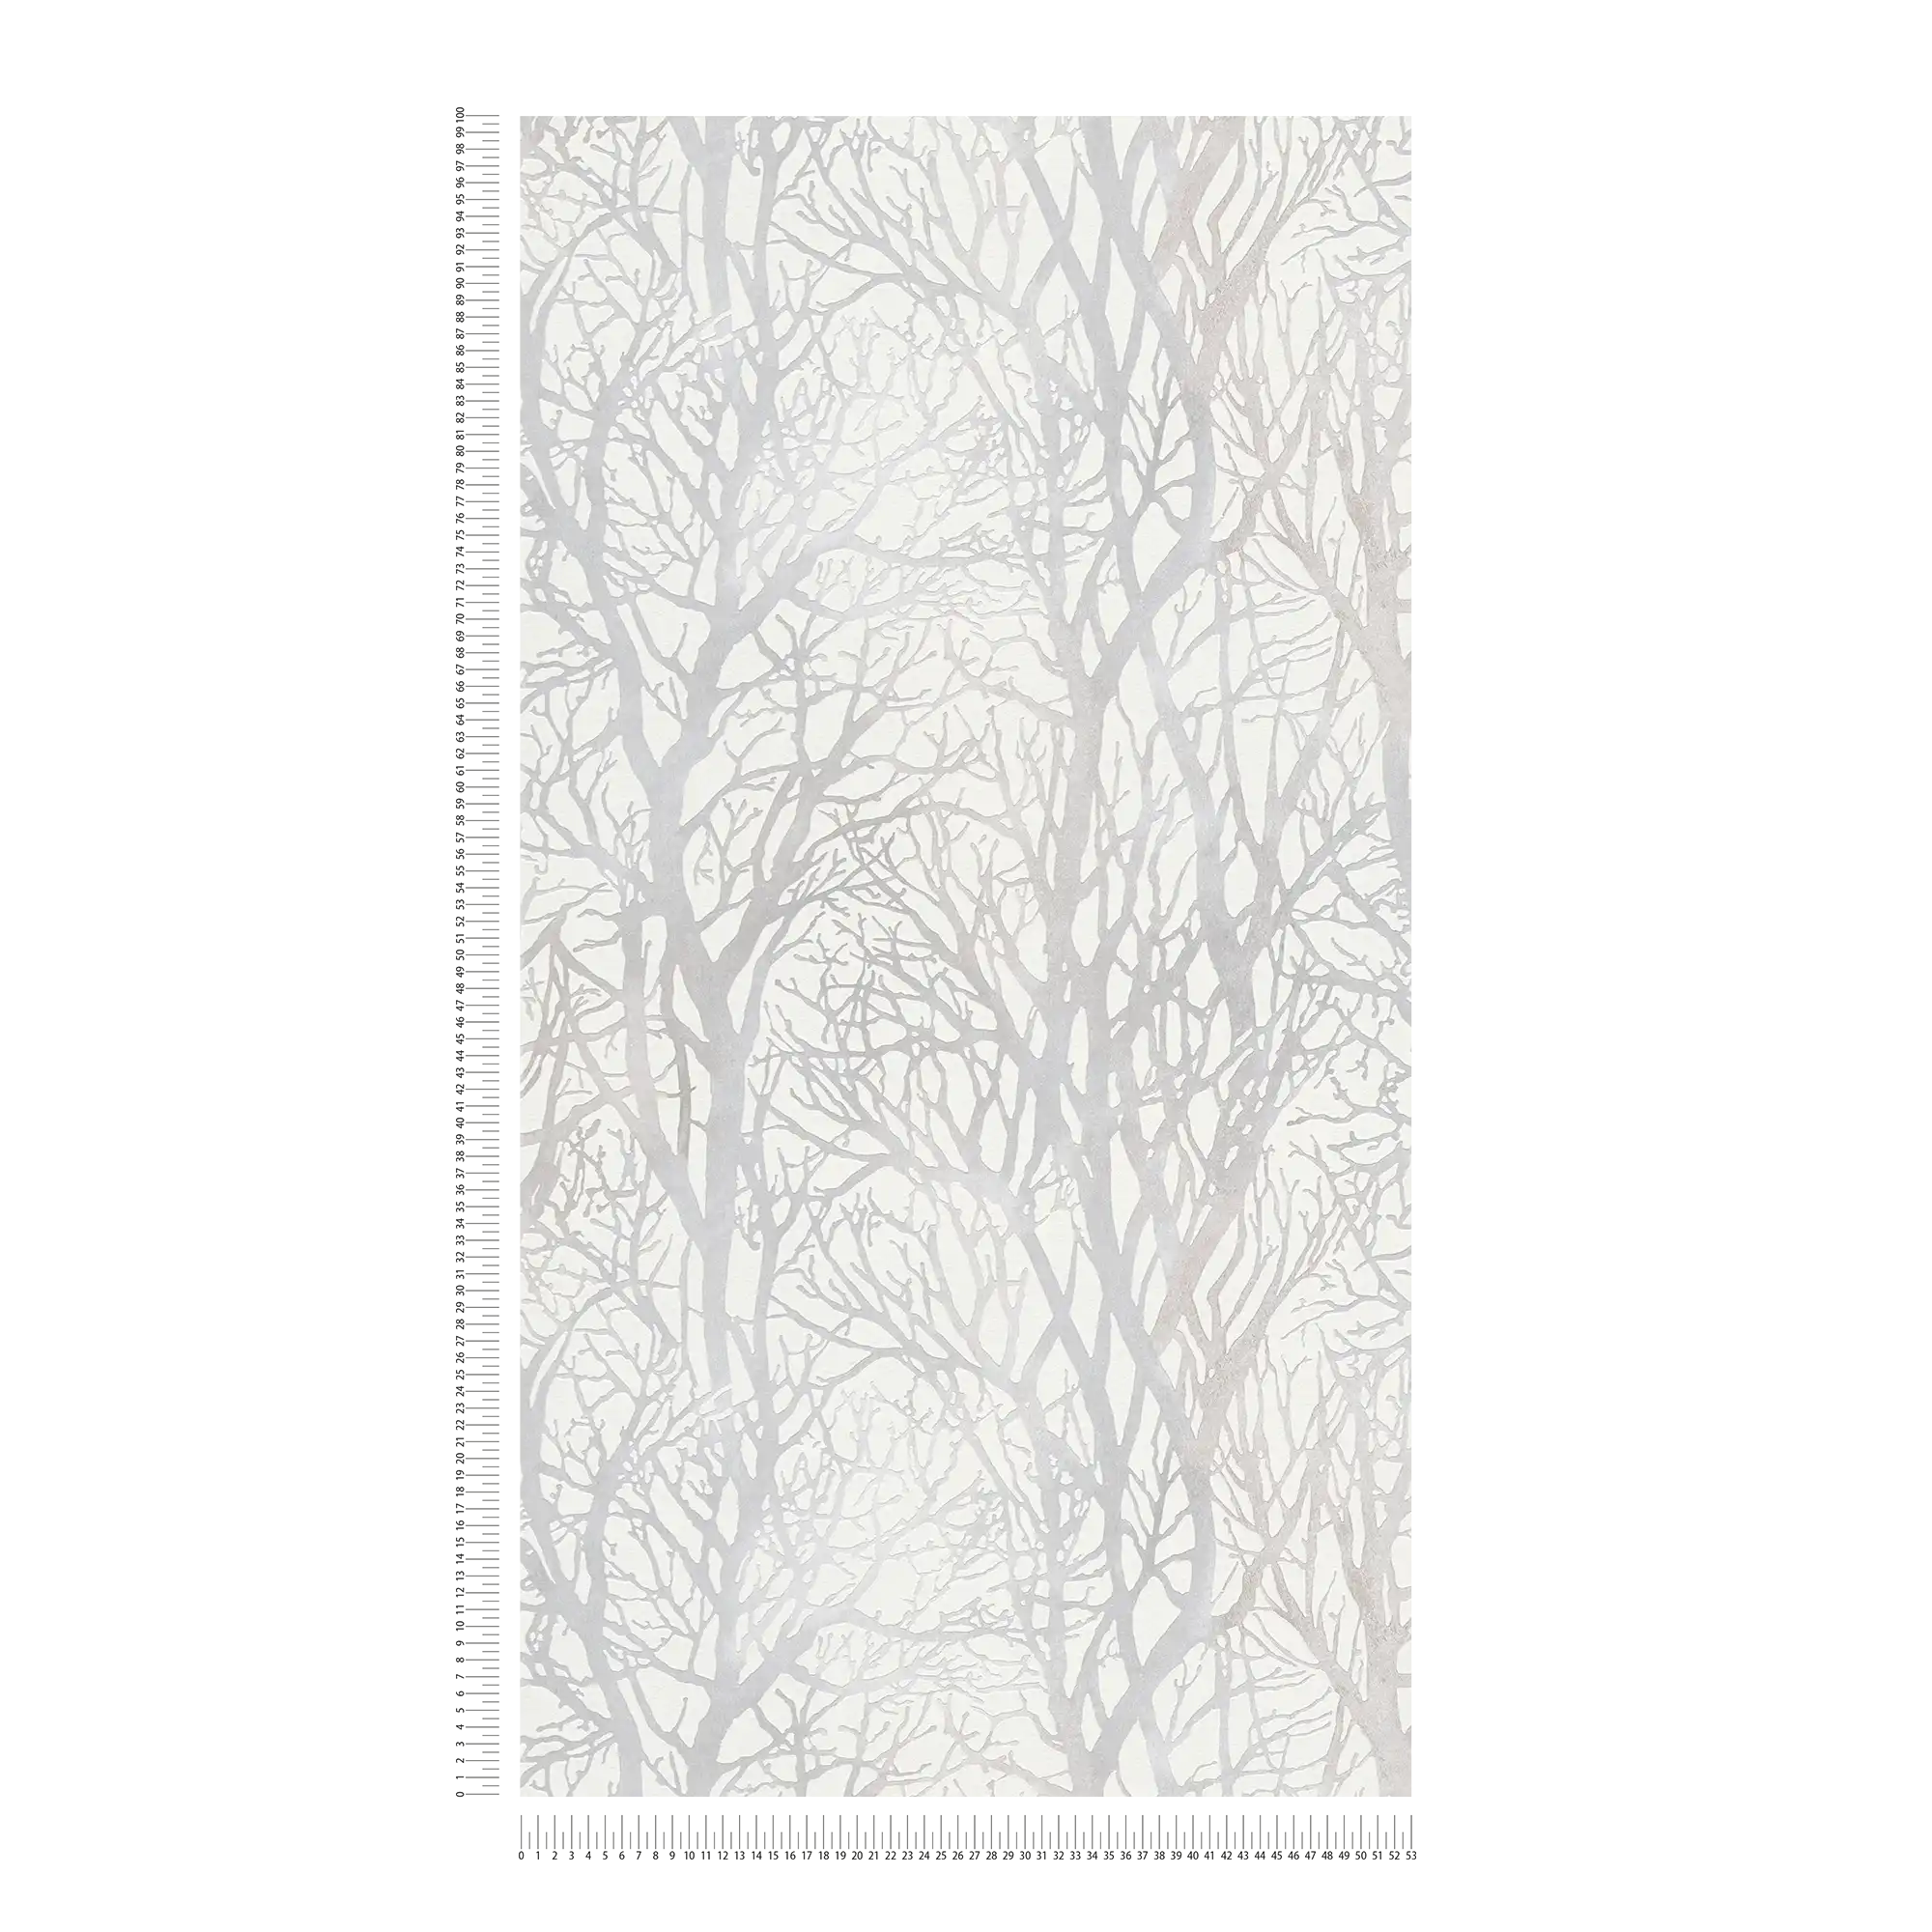             Silver grey wallpaper with branches motif and metallic effect - white, silver
        